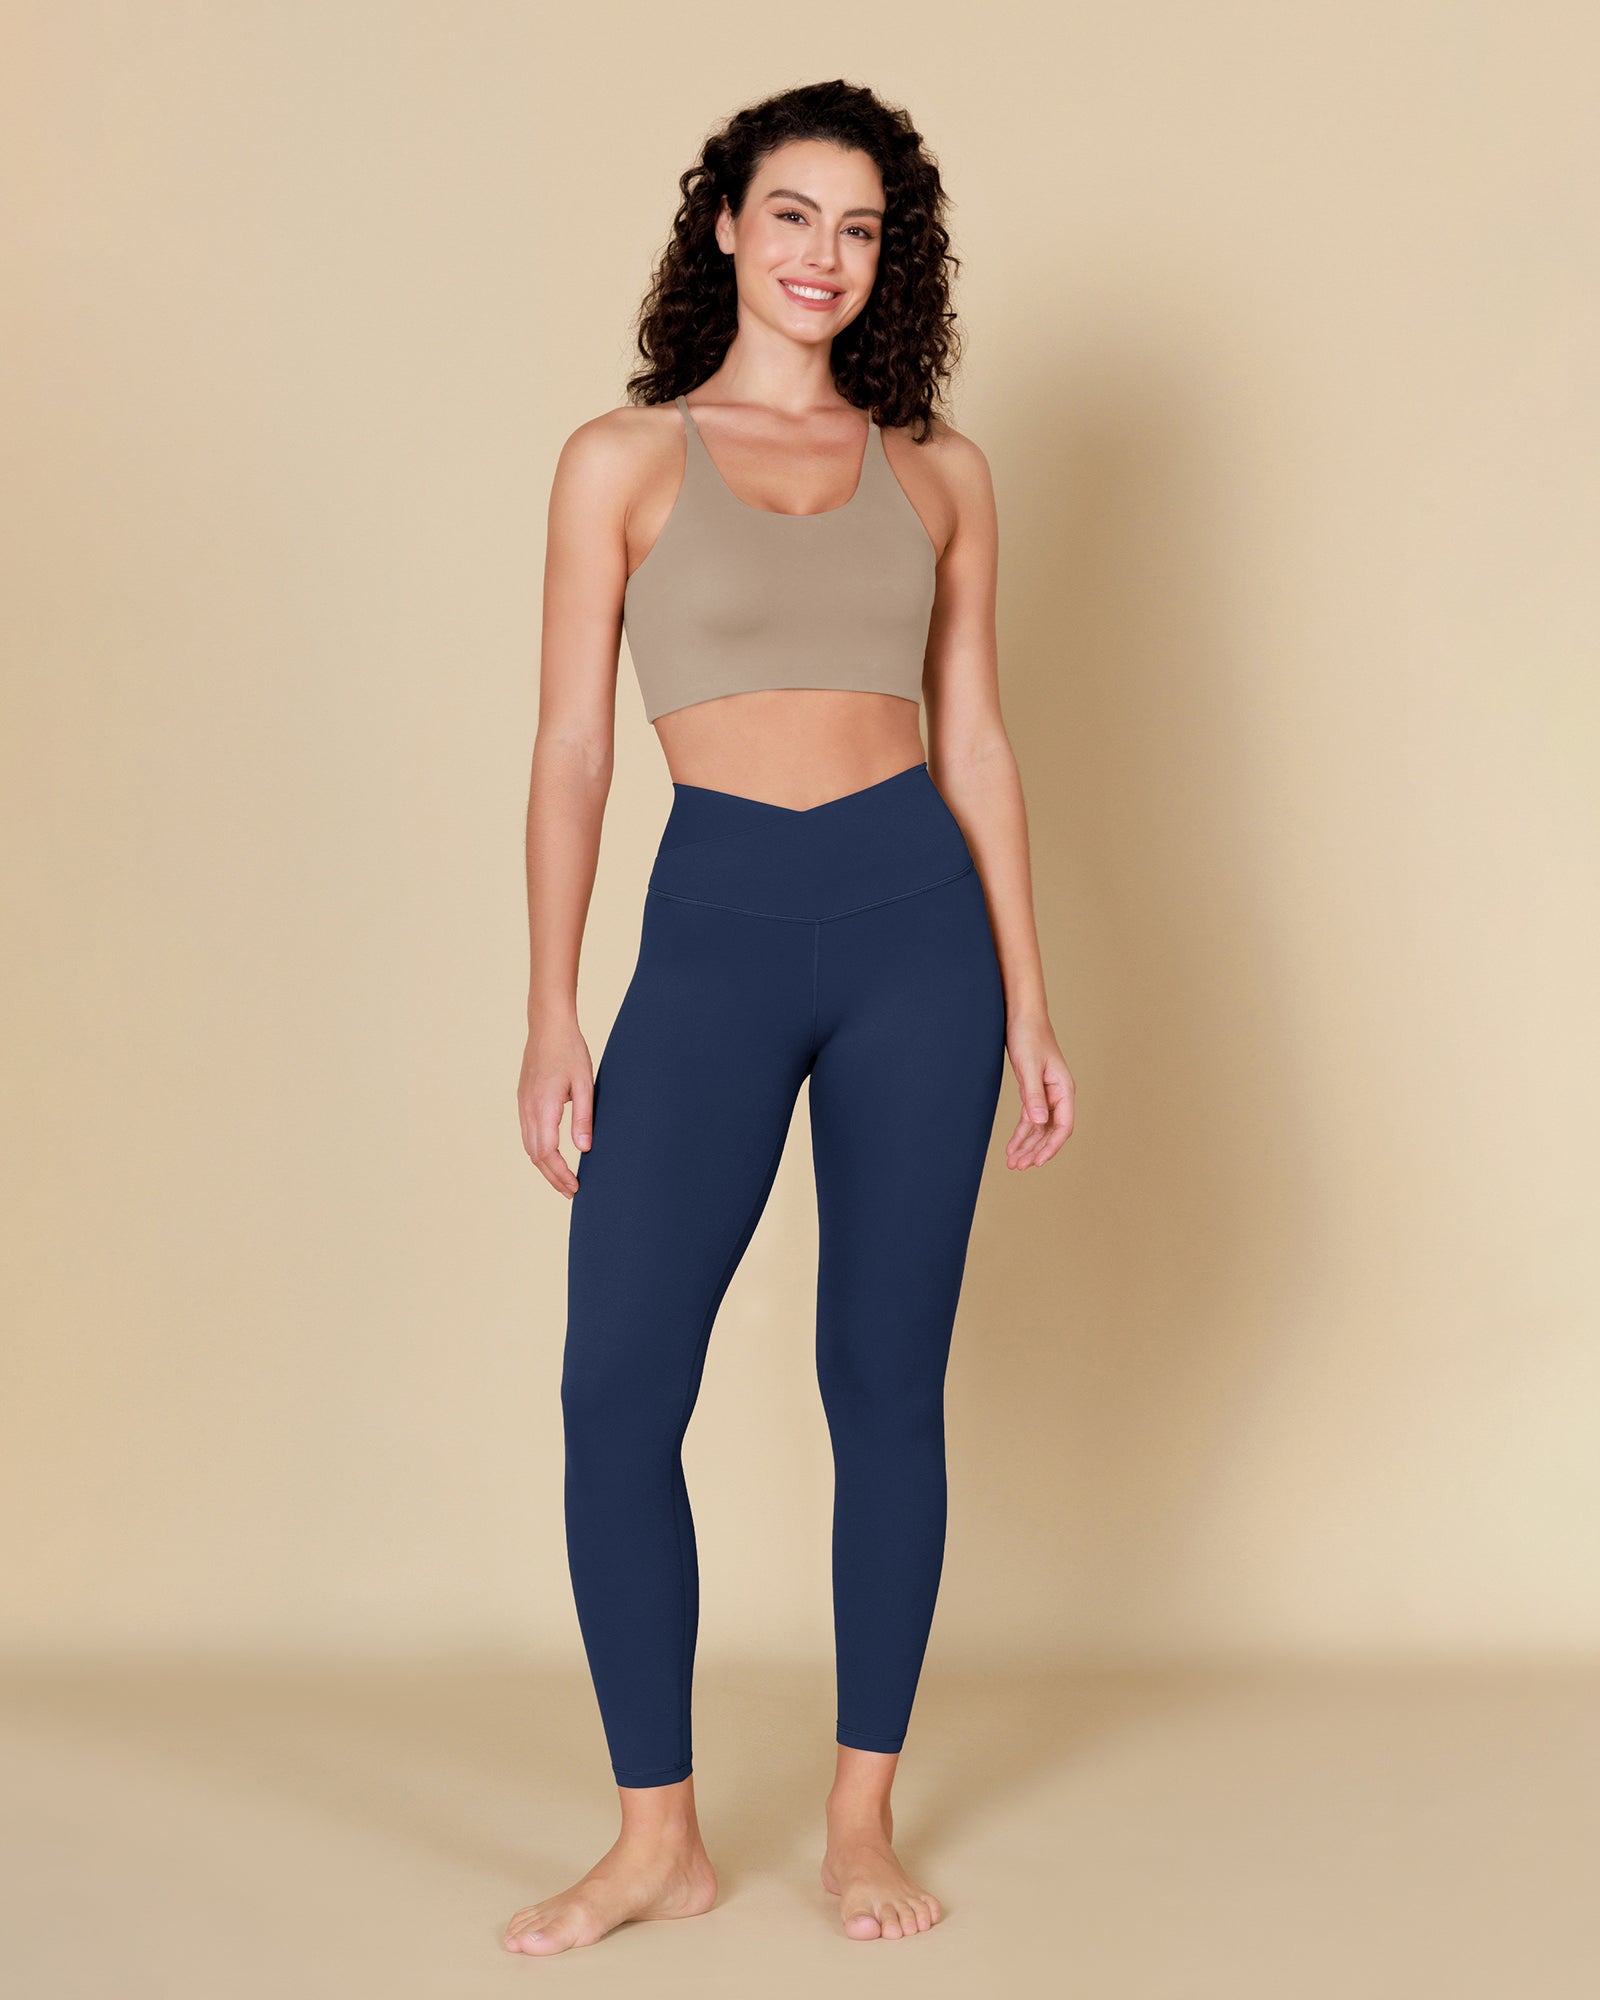 ODCLOUD Crossover 7/8 Leggings with Back Pocket Navy - ododos